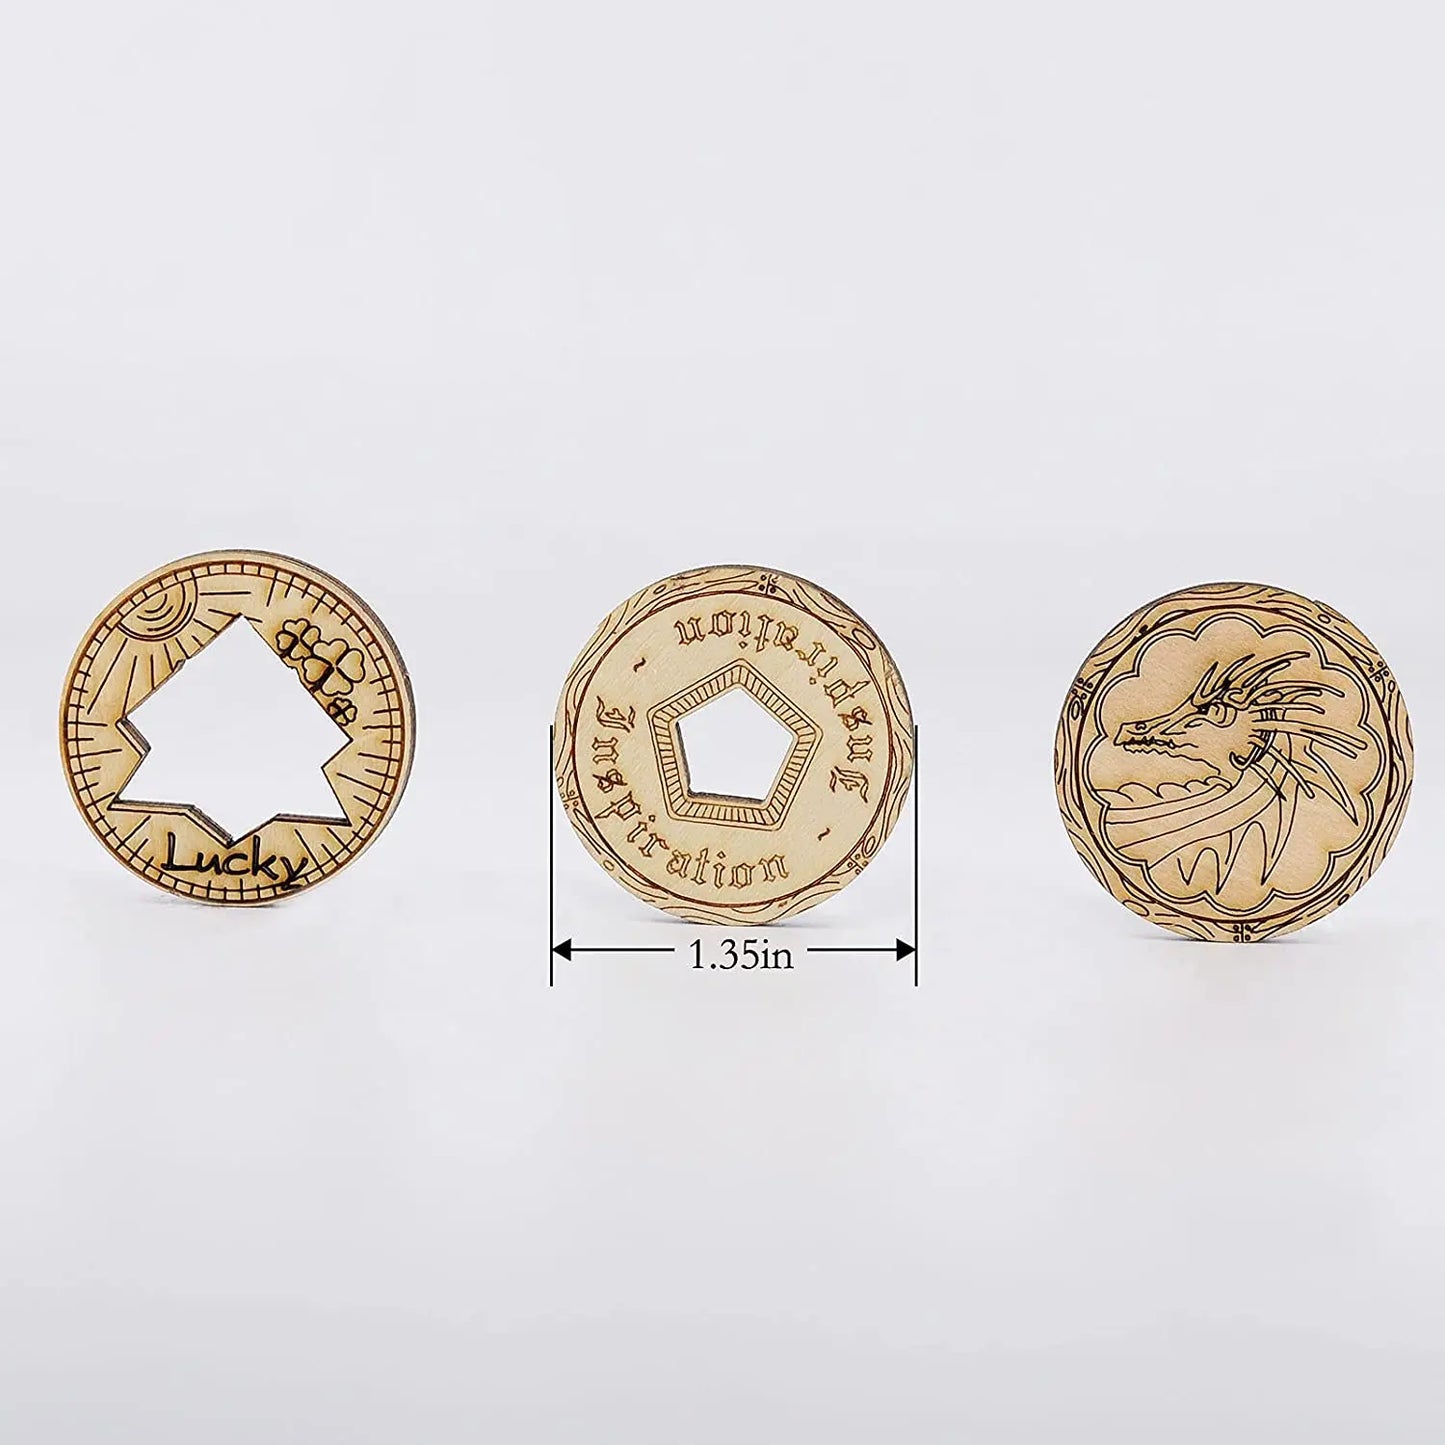 D&D Inspiration Coin Tokens Laser Cut Wood Carved with Dragon & Ship Rudder (Set of 9) Board Games for Adults